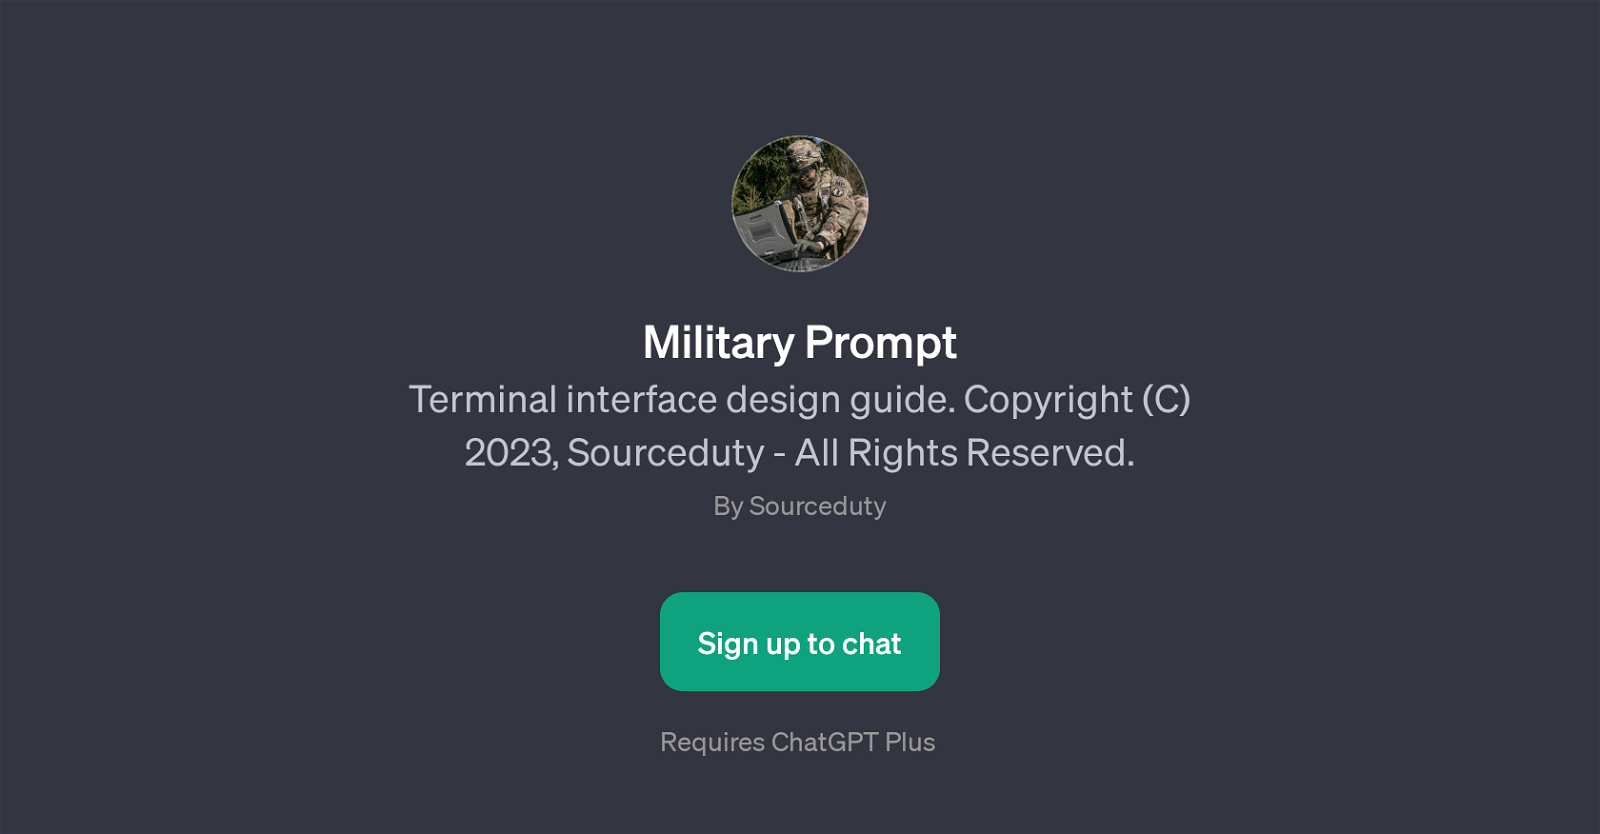 Military Prompt website